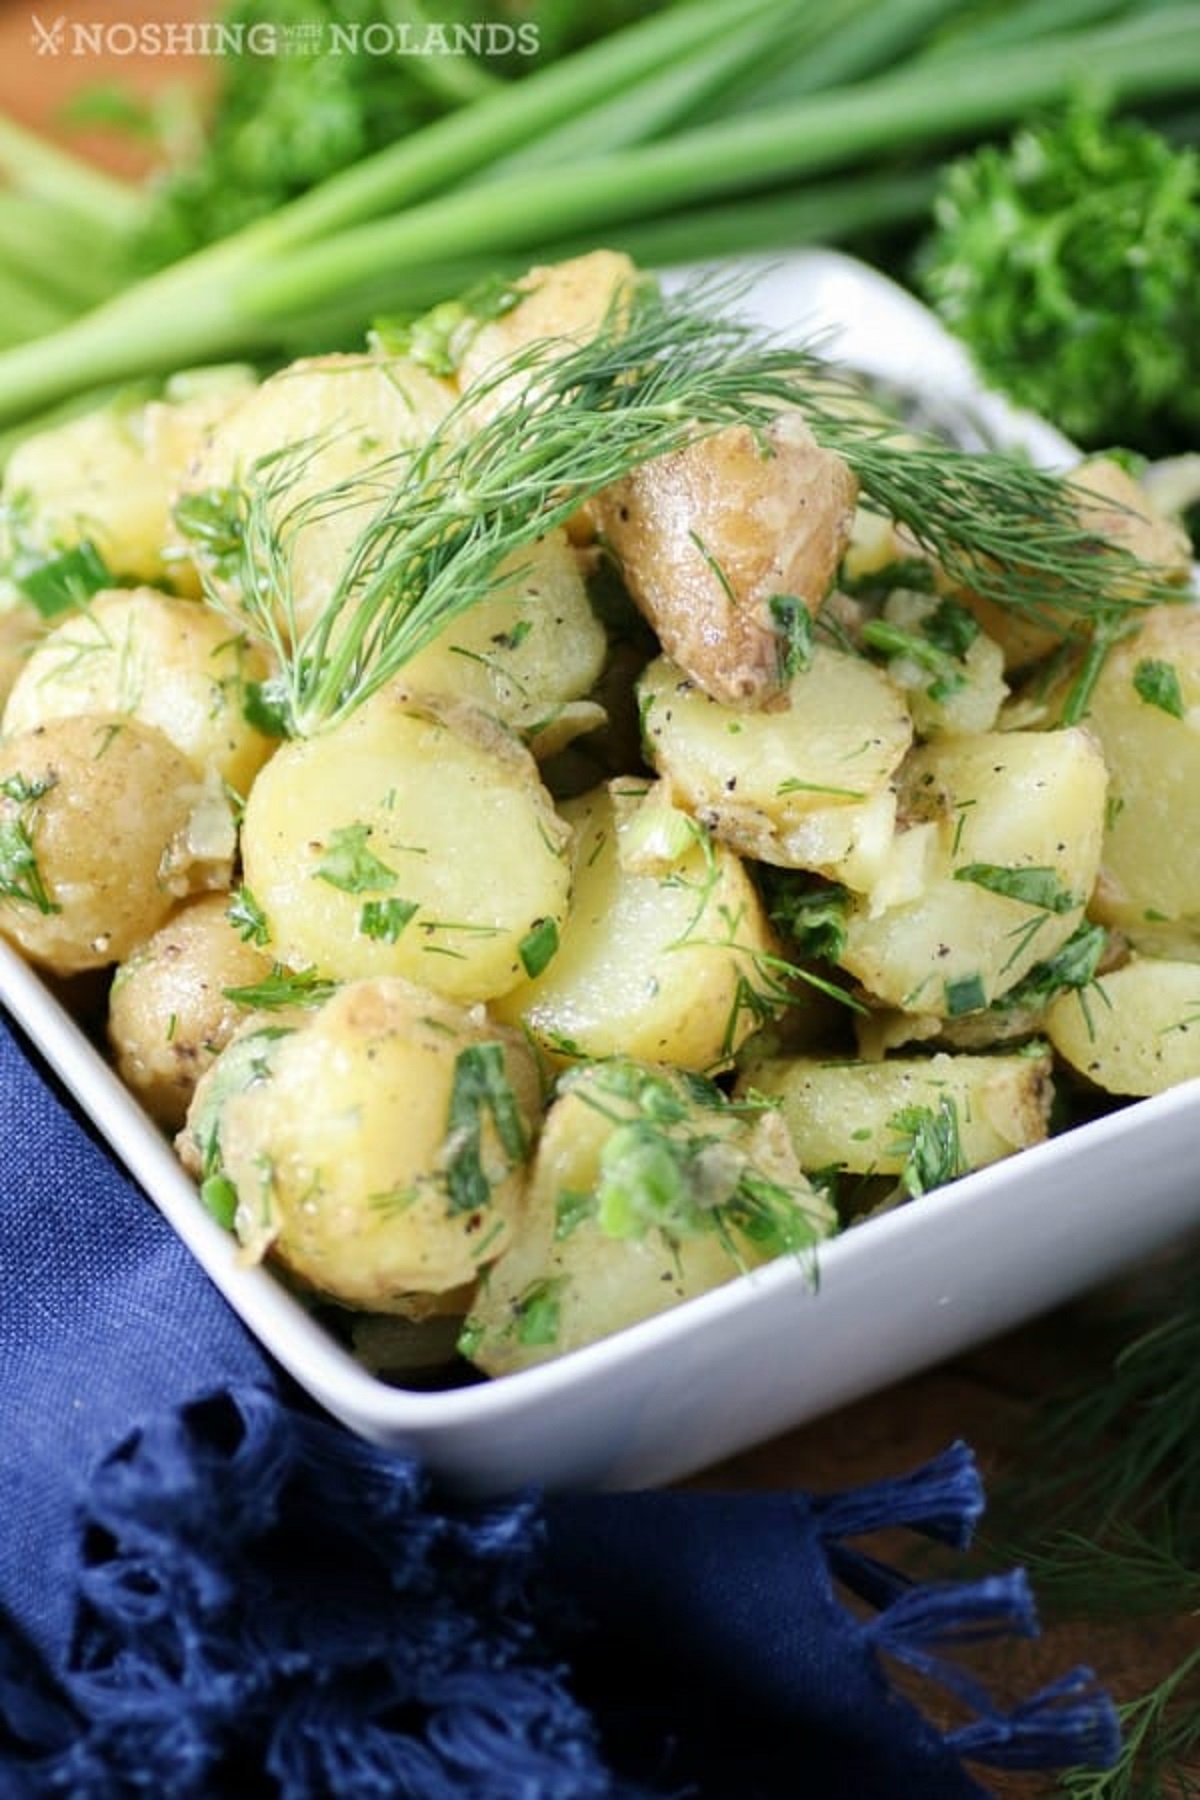 Herbed potato salad in a white serving bowl with parsley, chives and dill.